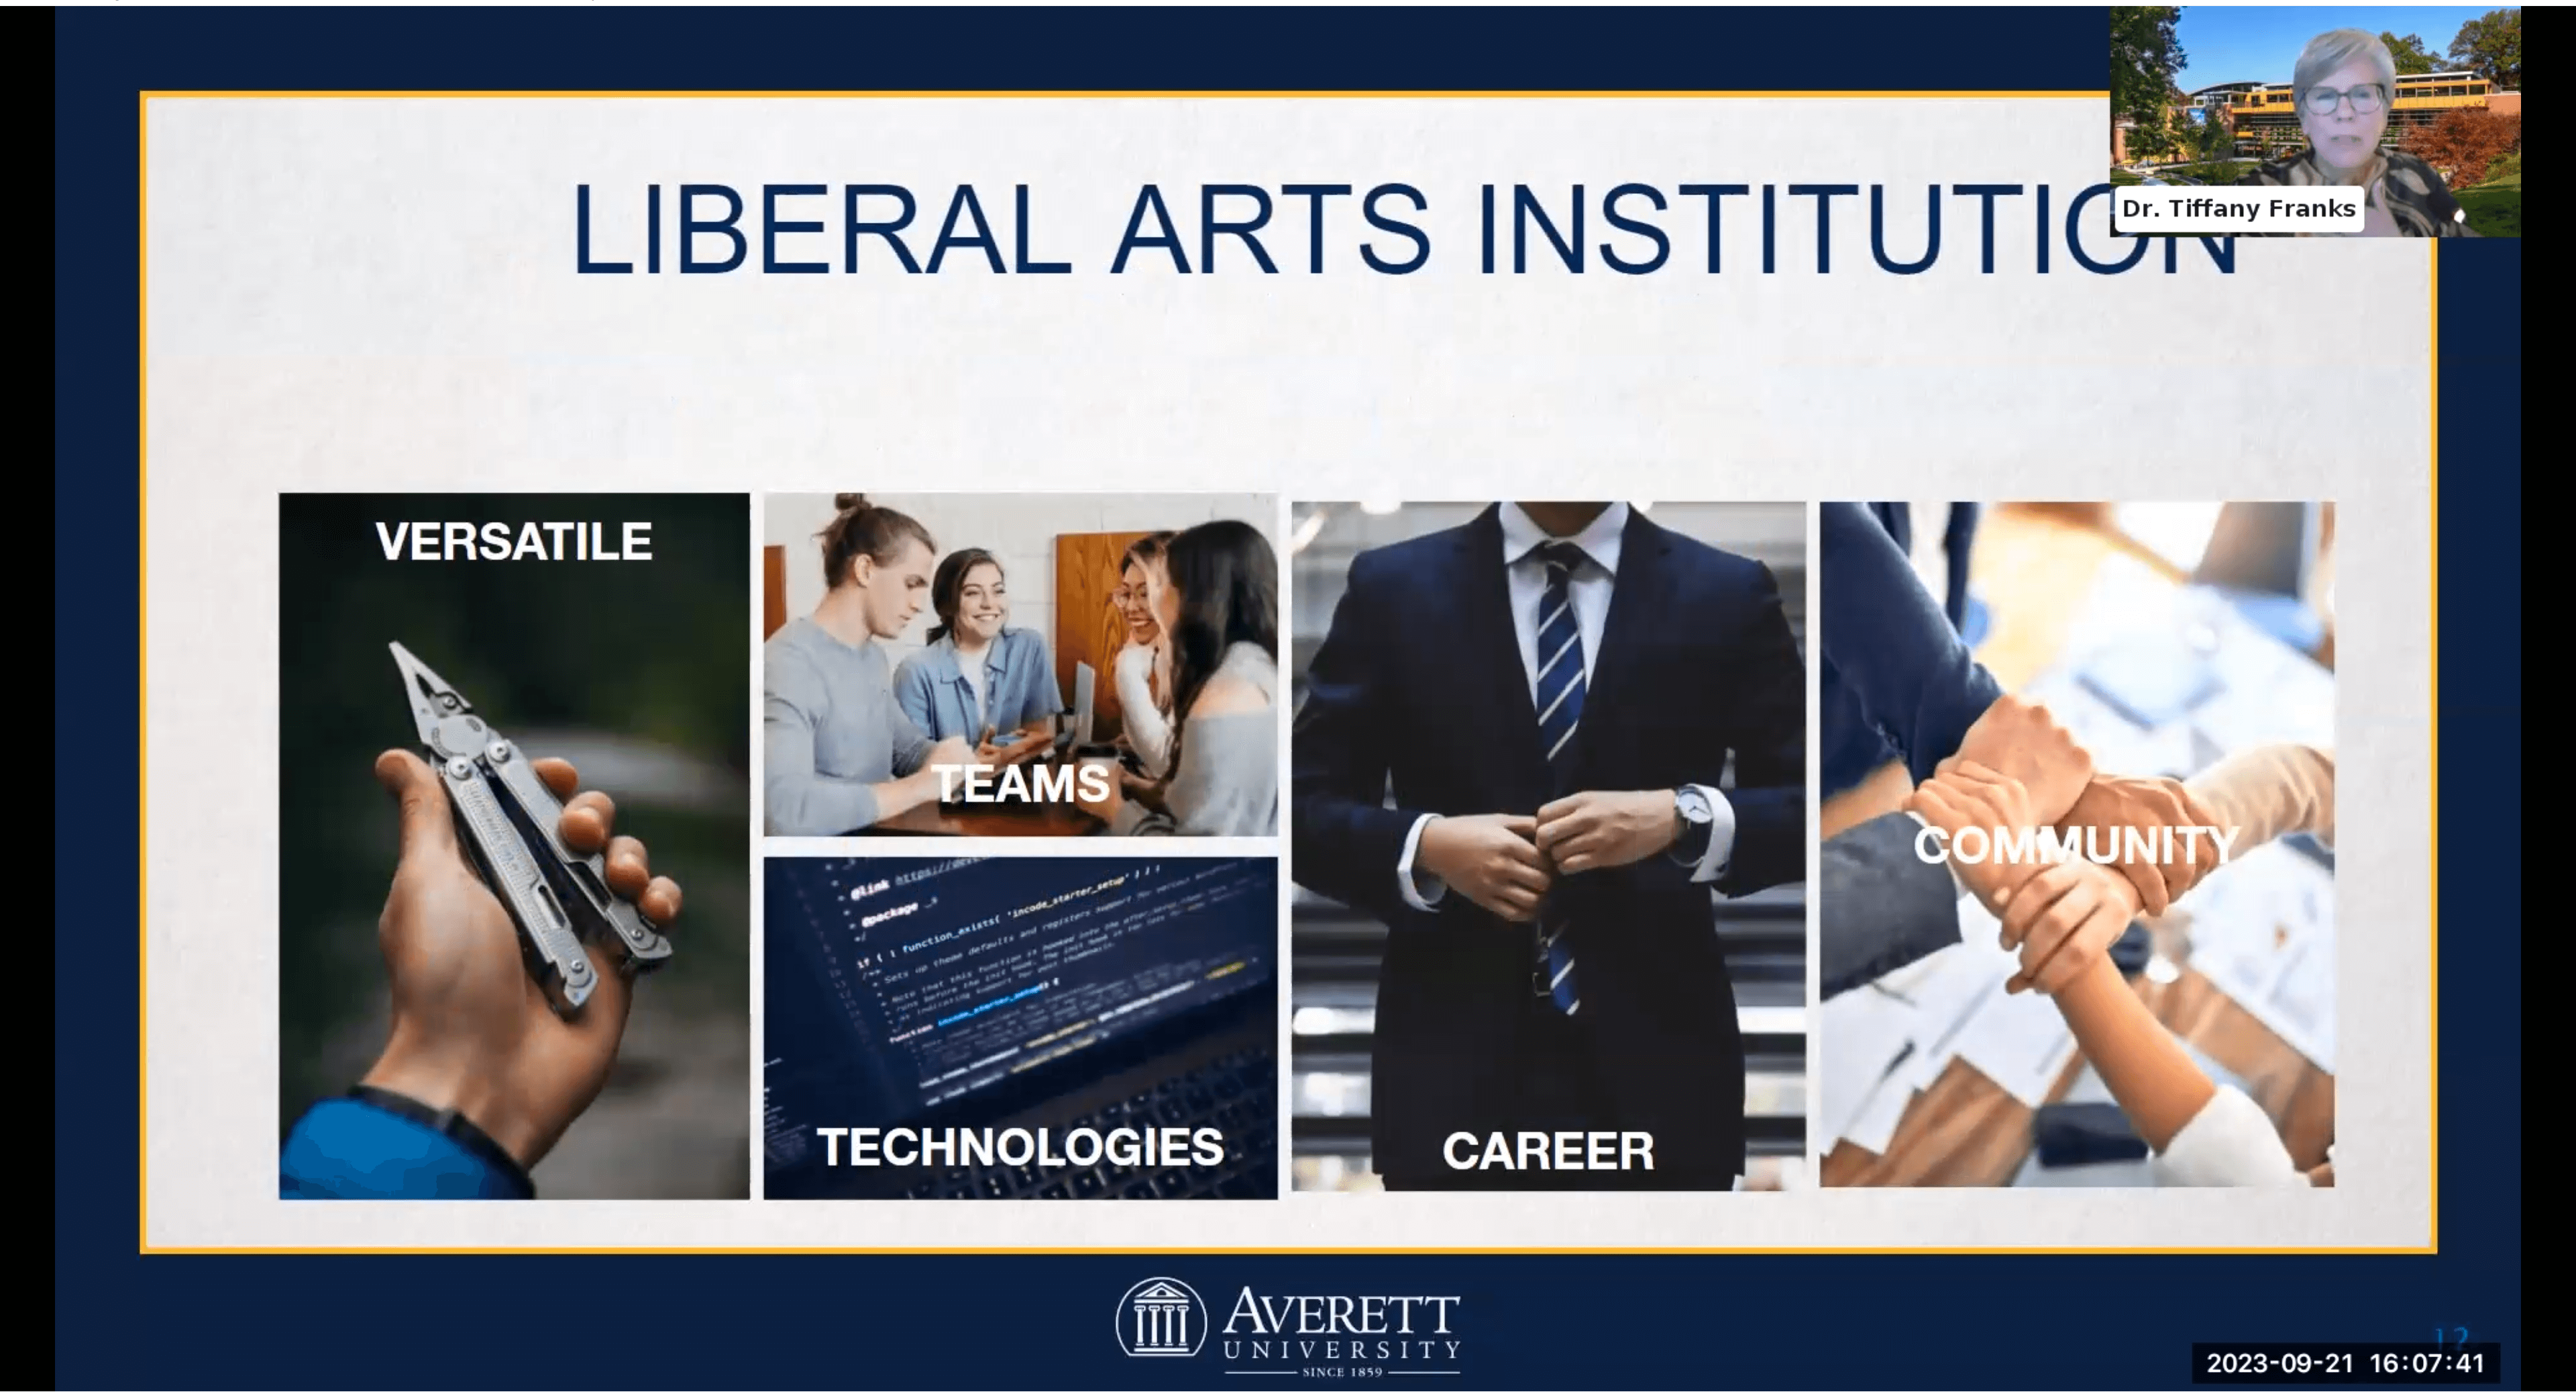 Liberal arts education prepares you for versatile careers, independent and team work, and adapting t